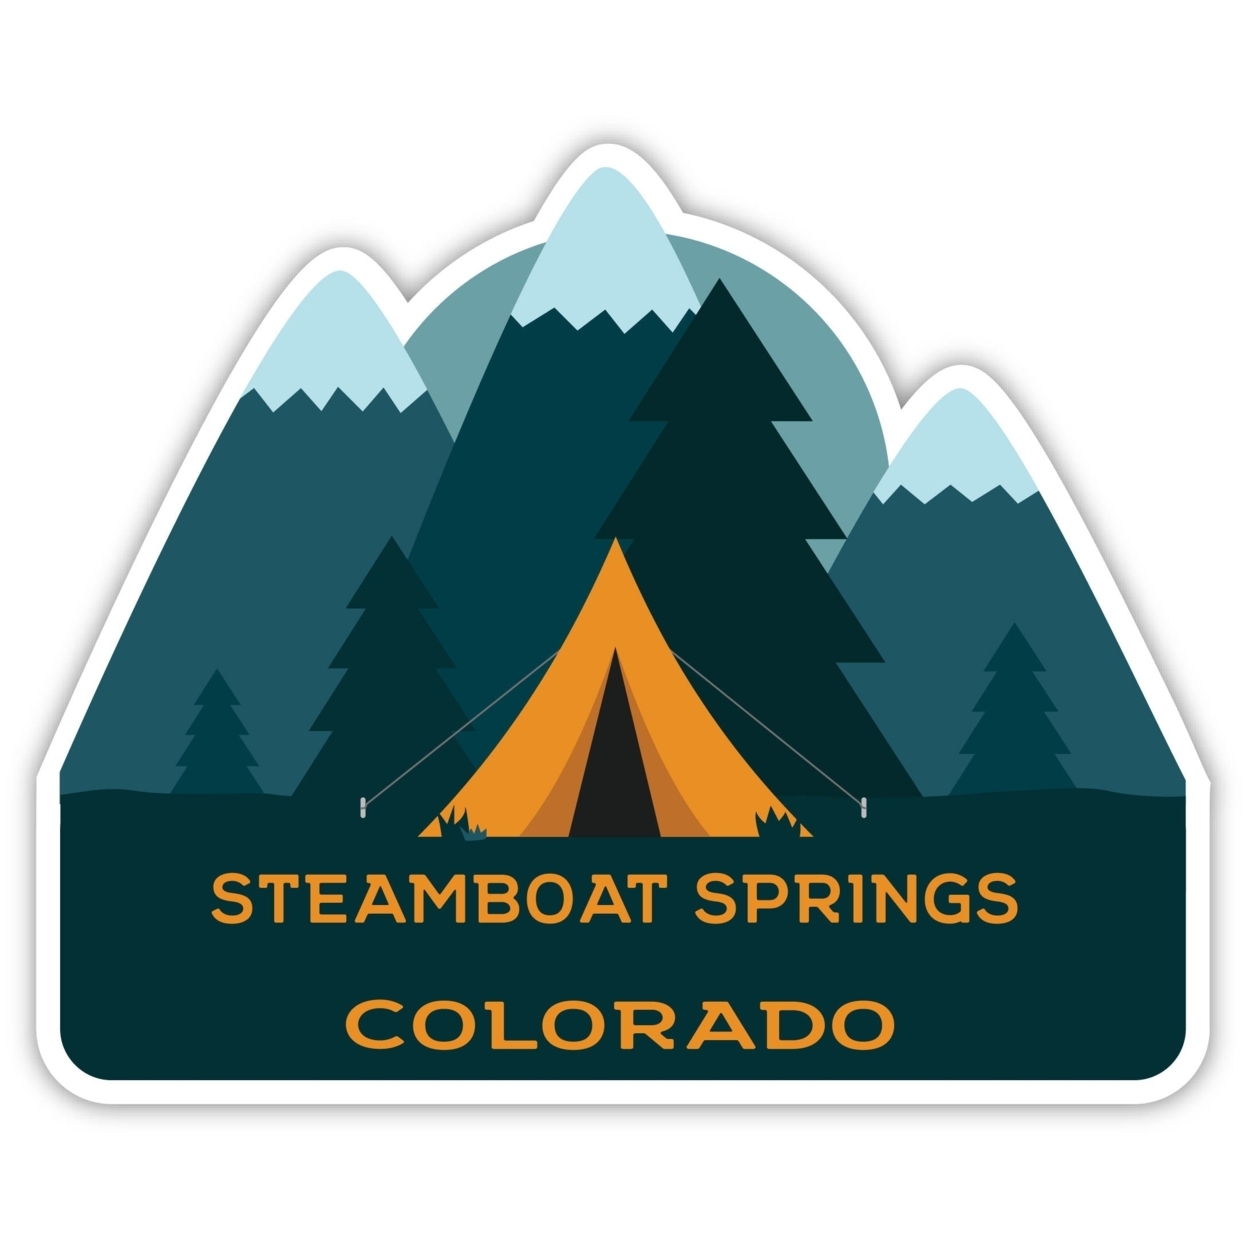 Steamboat Springs Colorado Souvenir Decorative Stickers (Choose Theme And Size) - Single Unit, 2-Inch, Camp Life